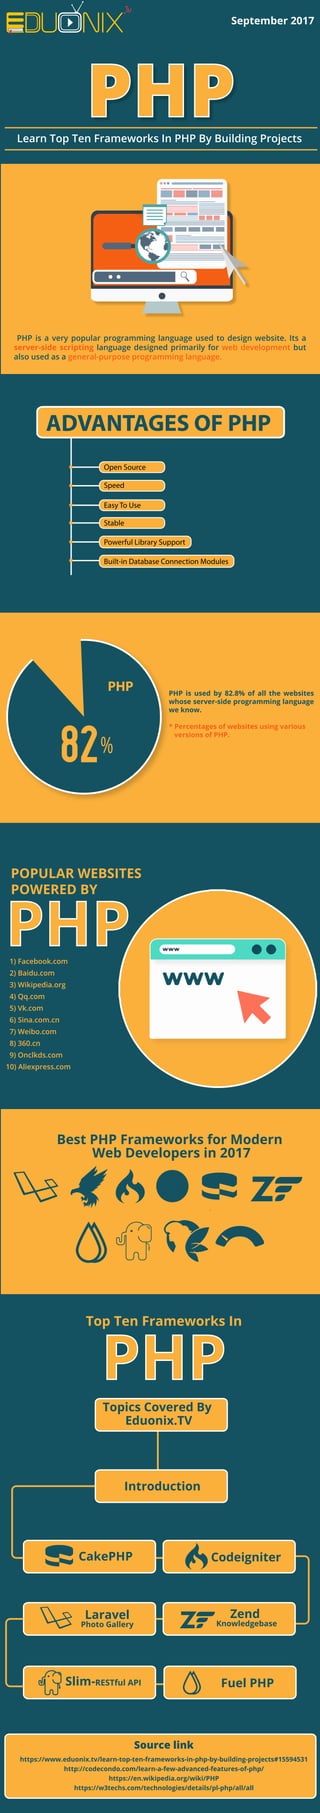 PHPLearn Top Ten Frameworks In PHP By Building Projects
PHP is a very popular programming language used to design website. Its a
server-side scripting language designed primarily for web development but
also used as a general-purpose programming language.
ADVANTAGES OF PHP
Open Source
Speed
Easy To Use
Stable
Powerful Library Support
Built-in Database Connection Modules
PHP
82%
PHP is used by 82.8% of all the websites
whose server-side programming language
we know.
* Percentages of websites using various
versions of PHP.
POPULAR WEBSITES
POWERED BY
PHP1) Facebook.com
2) Baidu.com
3) Wikipedia.org
4) Qq.com
5) Vk.com
6) Sina.com.cn
7) Weibo.com
8) 360.cn
9) Onclkds.com
10) Aliexpress.com
Best PHP Frameworks for Modern
Web Developers in 2017
PHP
Top Ten Frameworks In
Topics Covered By
Eduonix.TV
Introduction
CakePHP
Laravel
Photo Gallery
Zend
Knowledgebase
Fuel PHPSlim-RESTful API
Codeigniter
https://www.eduonix.tv/learn-top-ten-frameworks-in-php-by-building-projects#15594531
http://codecondo.com/learn-a-few-advanced-features-of-php/
https://en.wikipedia.org/wiki/PHP
https://w3techs.com/technologies/details/pl-php/all/all
Source link
September 2017
 